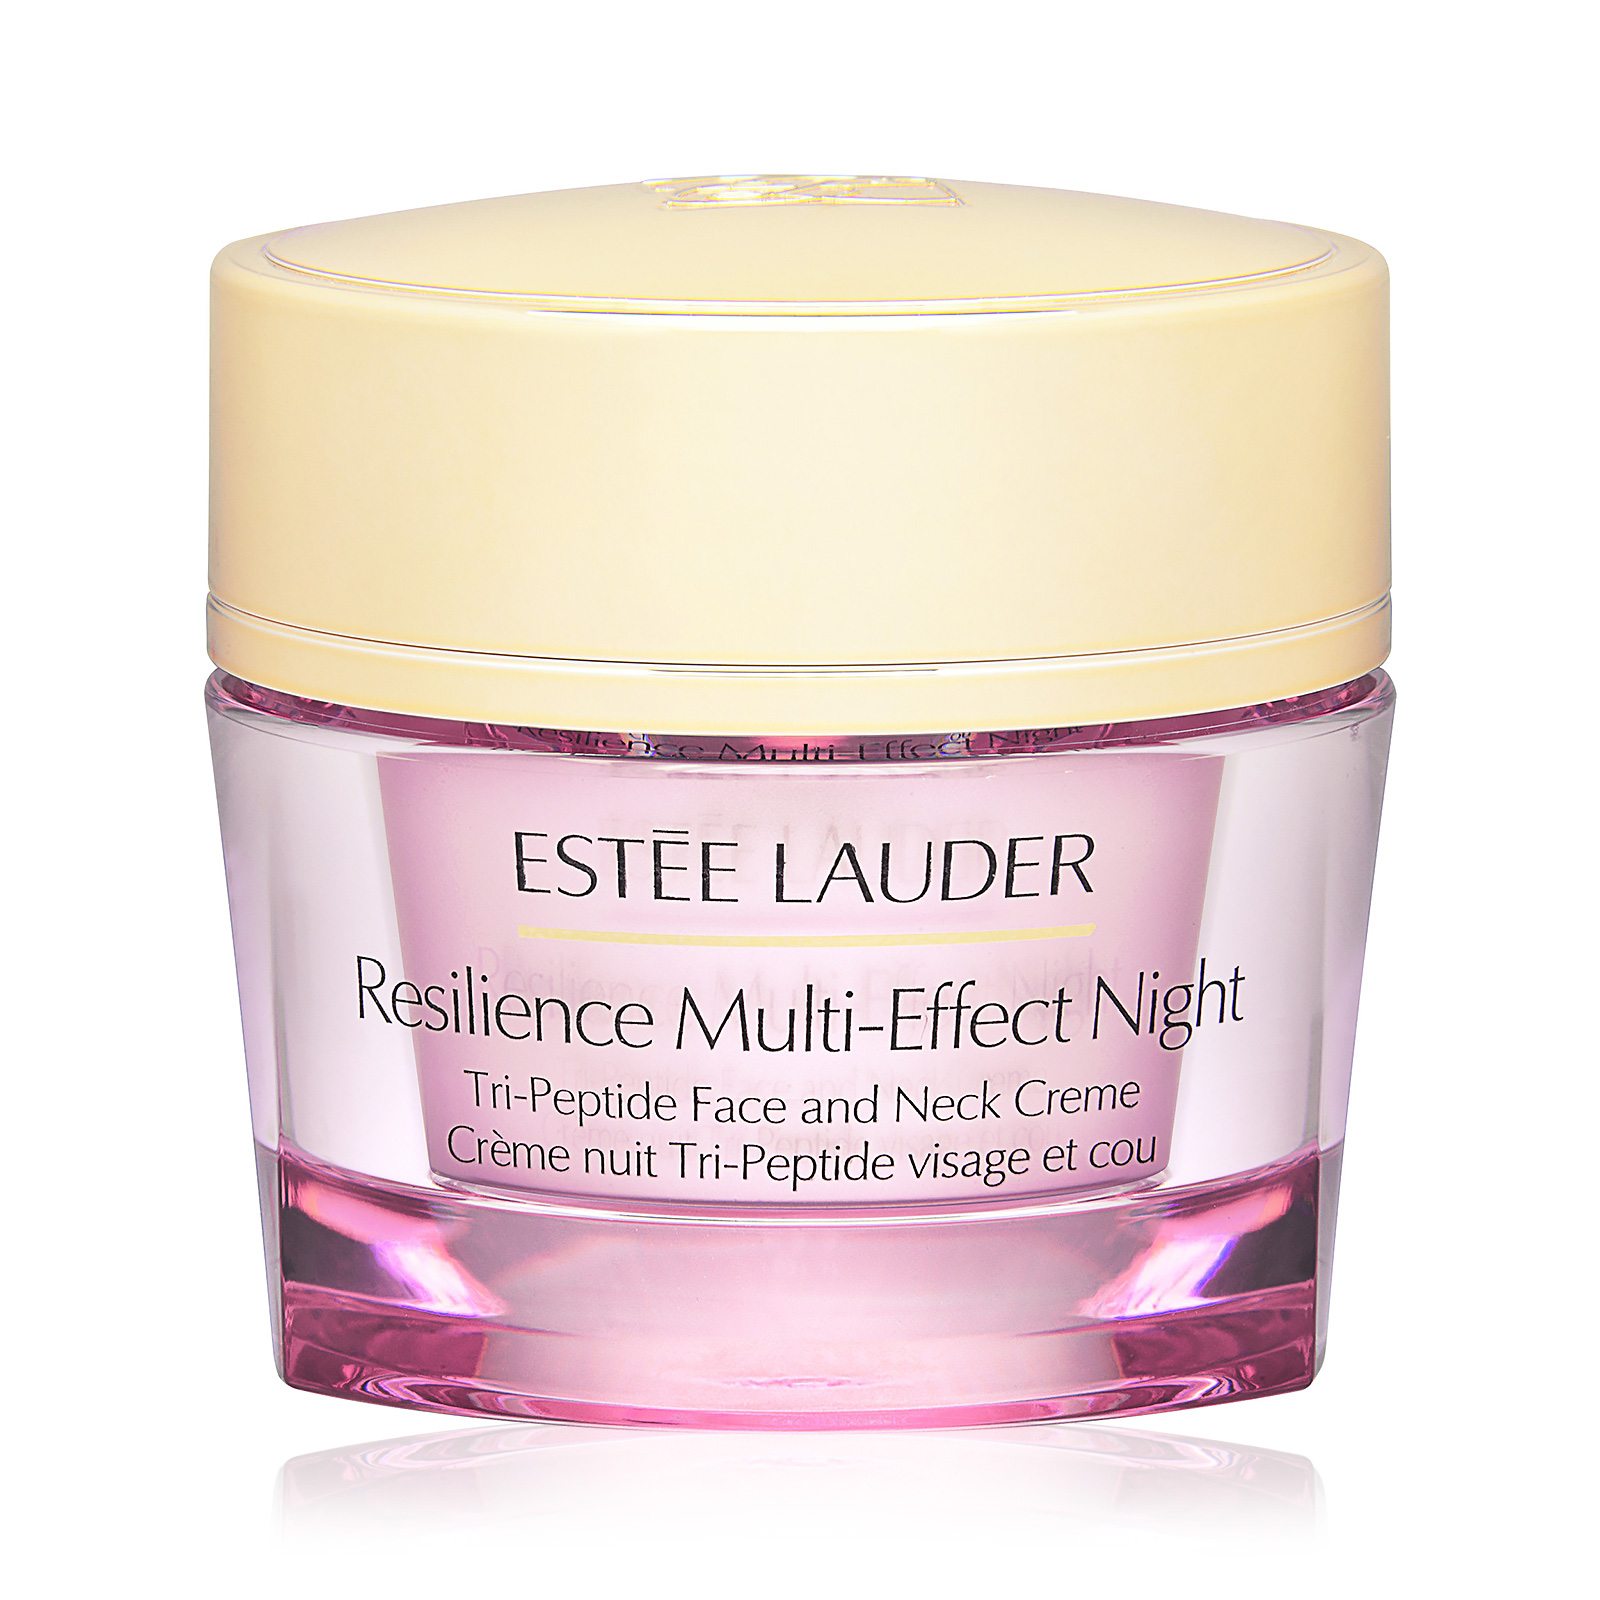 Resilience Lift Firming/Sculpting Face and Neck Night Crème